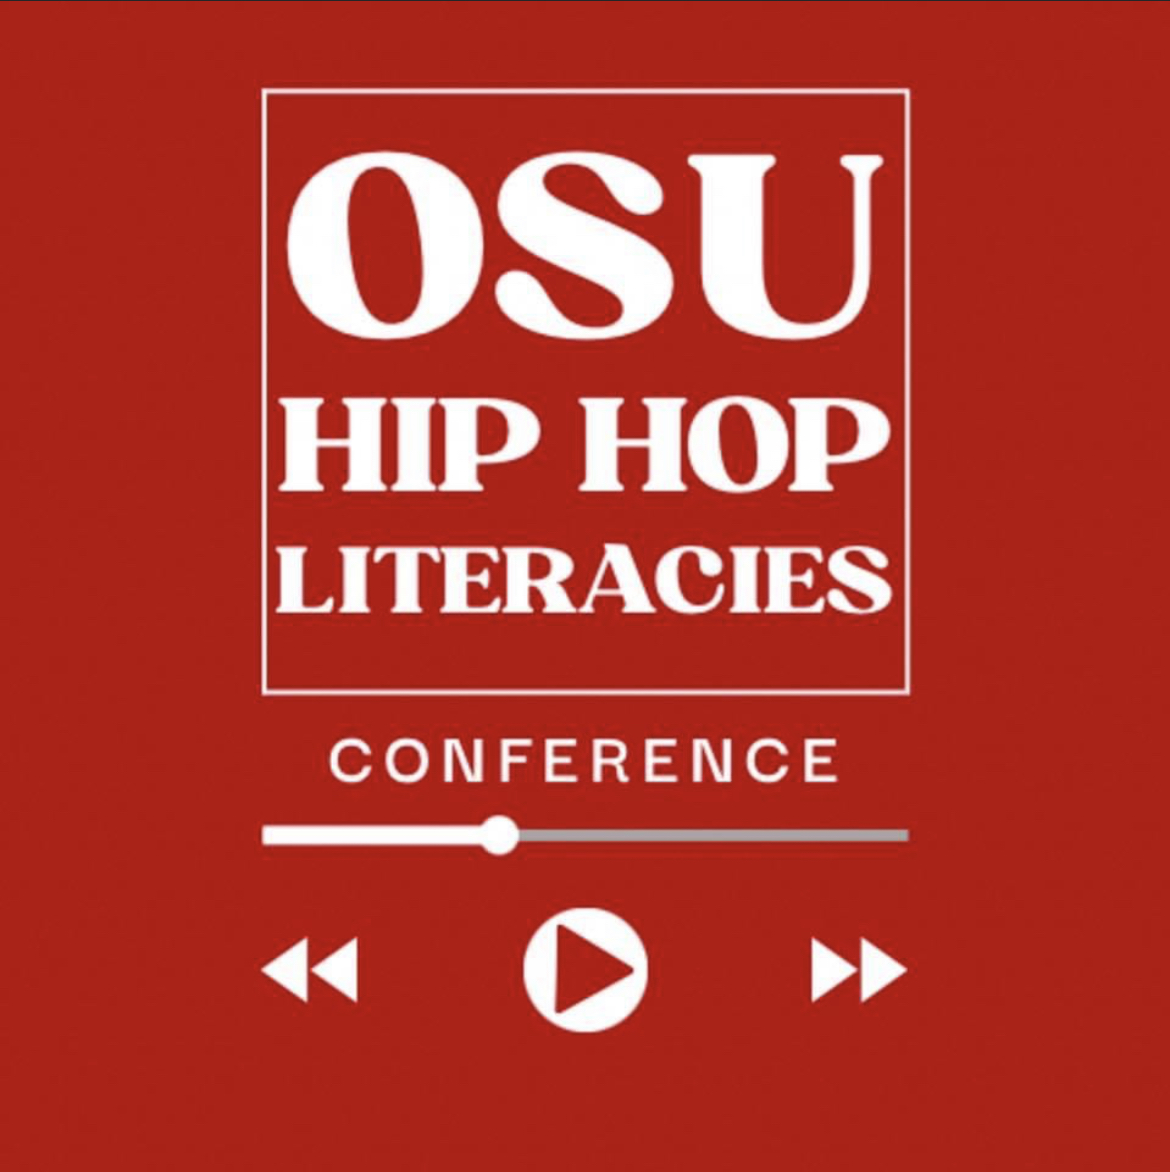 "OSU HIP HOP LITERACIES CONFERENCE" letters in a box that looks like it is on a media player like an iPod or application that plays music